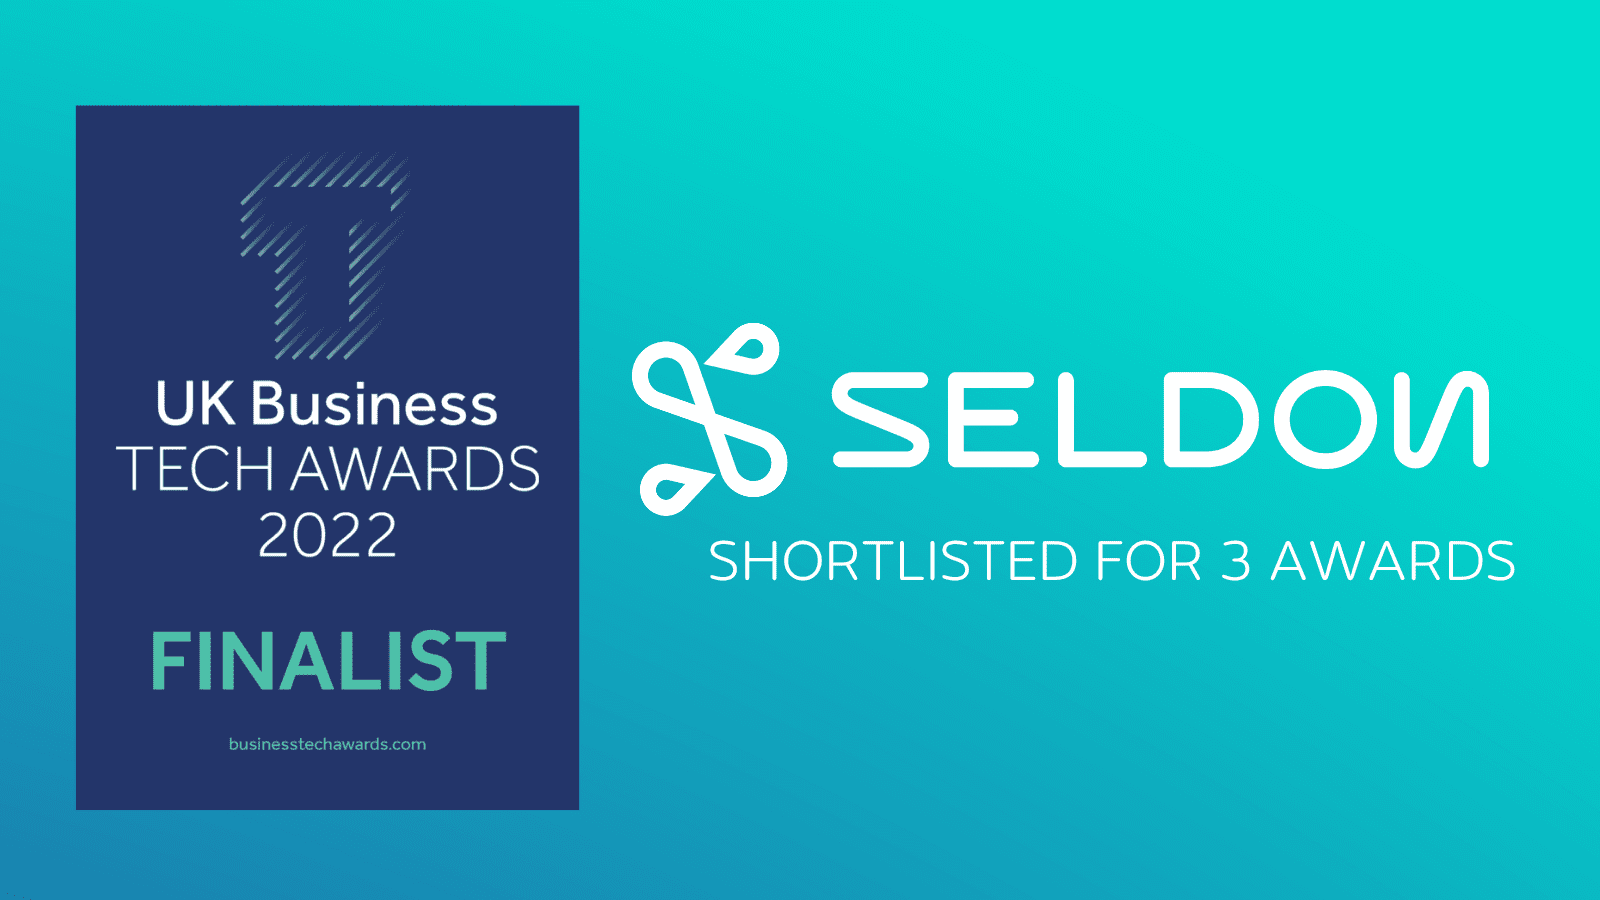 Seldon shortlisted for 3 categories at the UK Business Tech Awards 2022